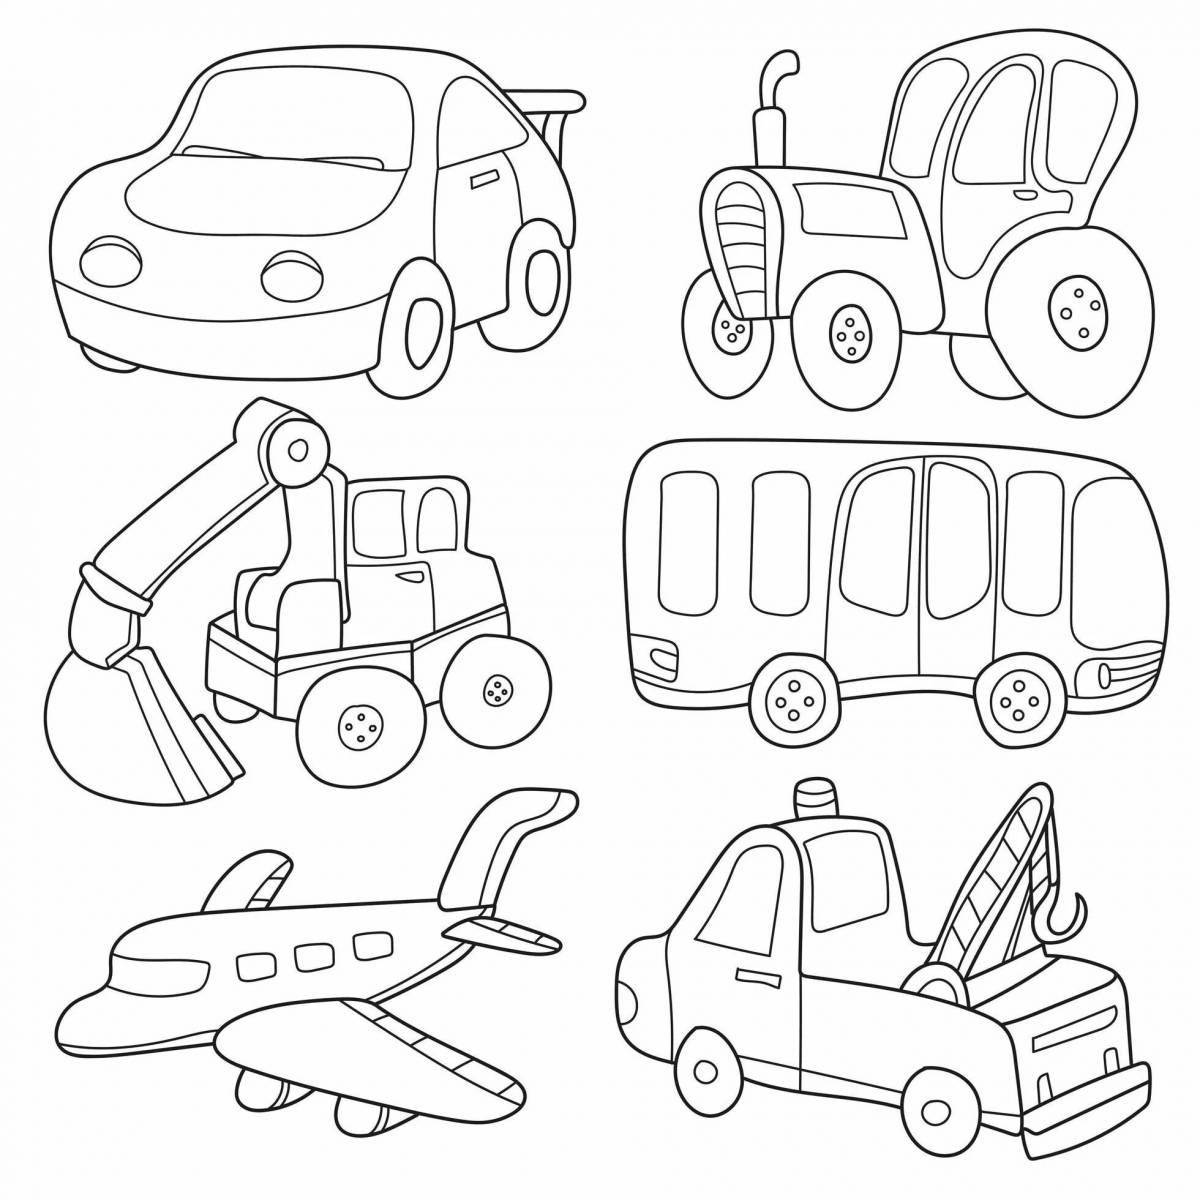 Coloring page of special transport for kids